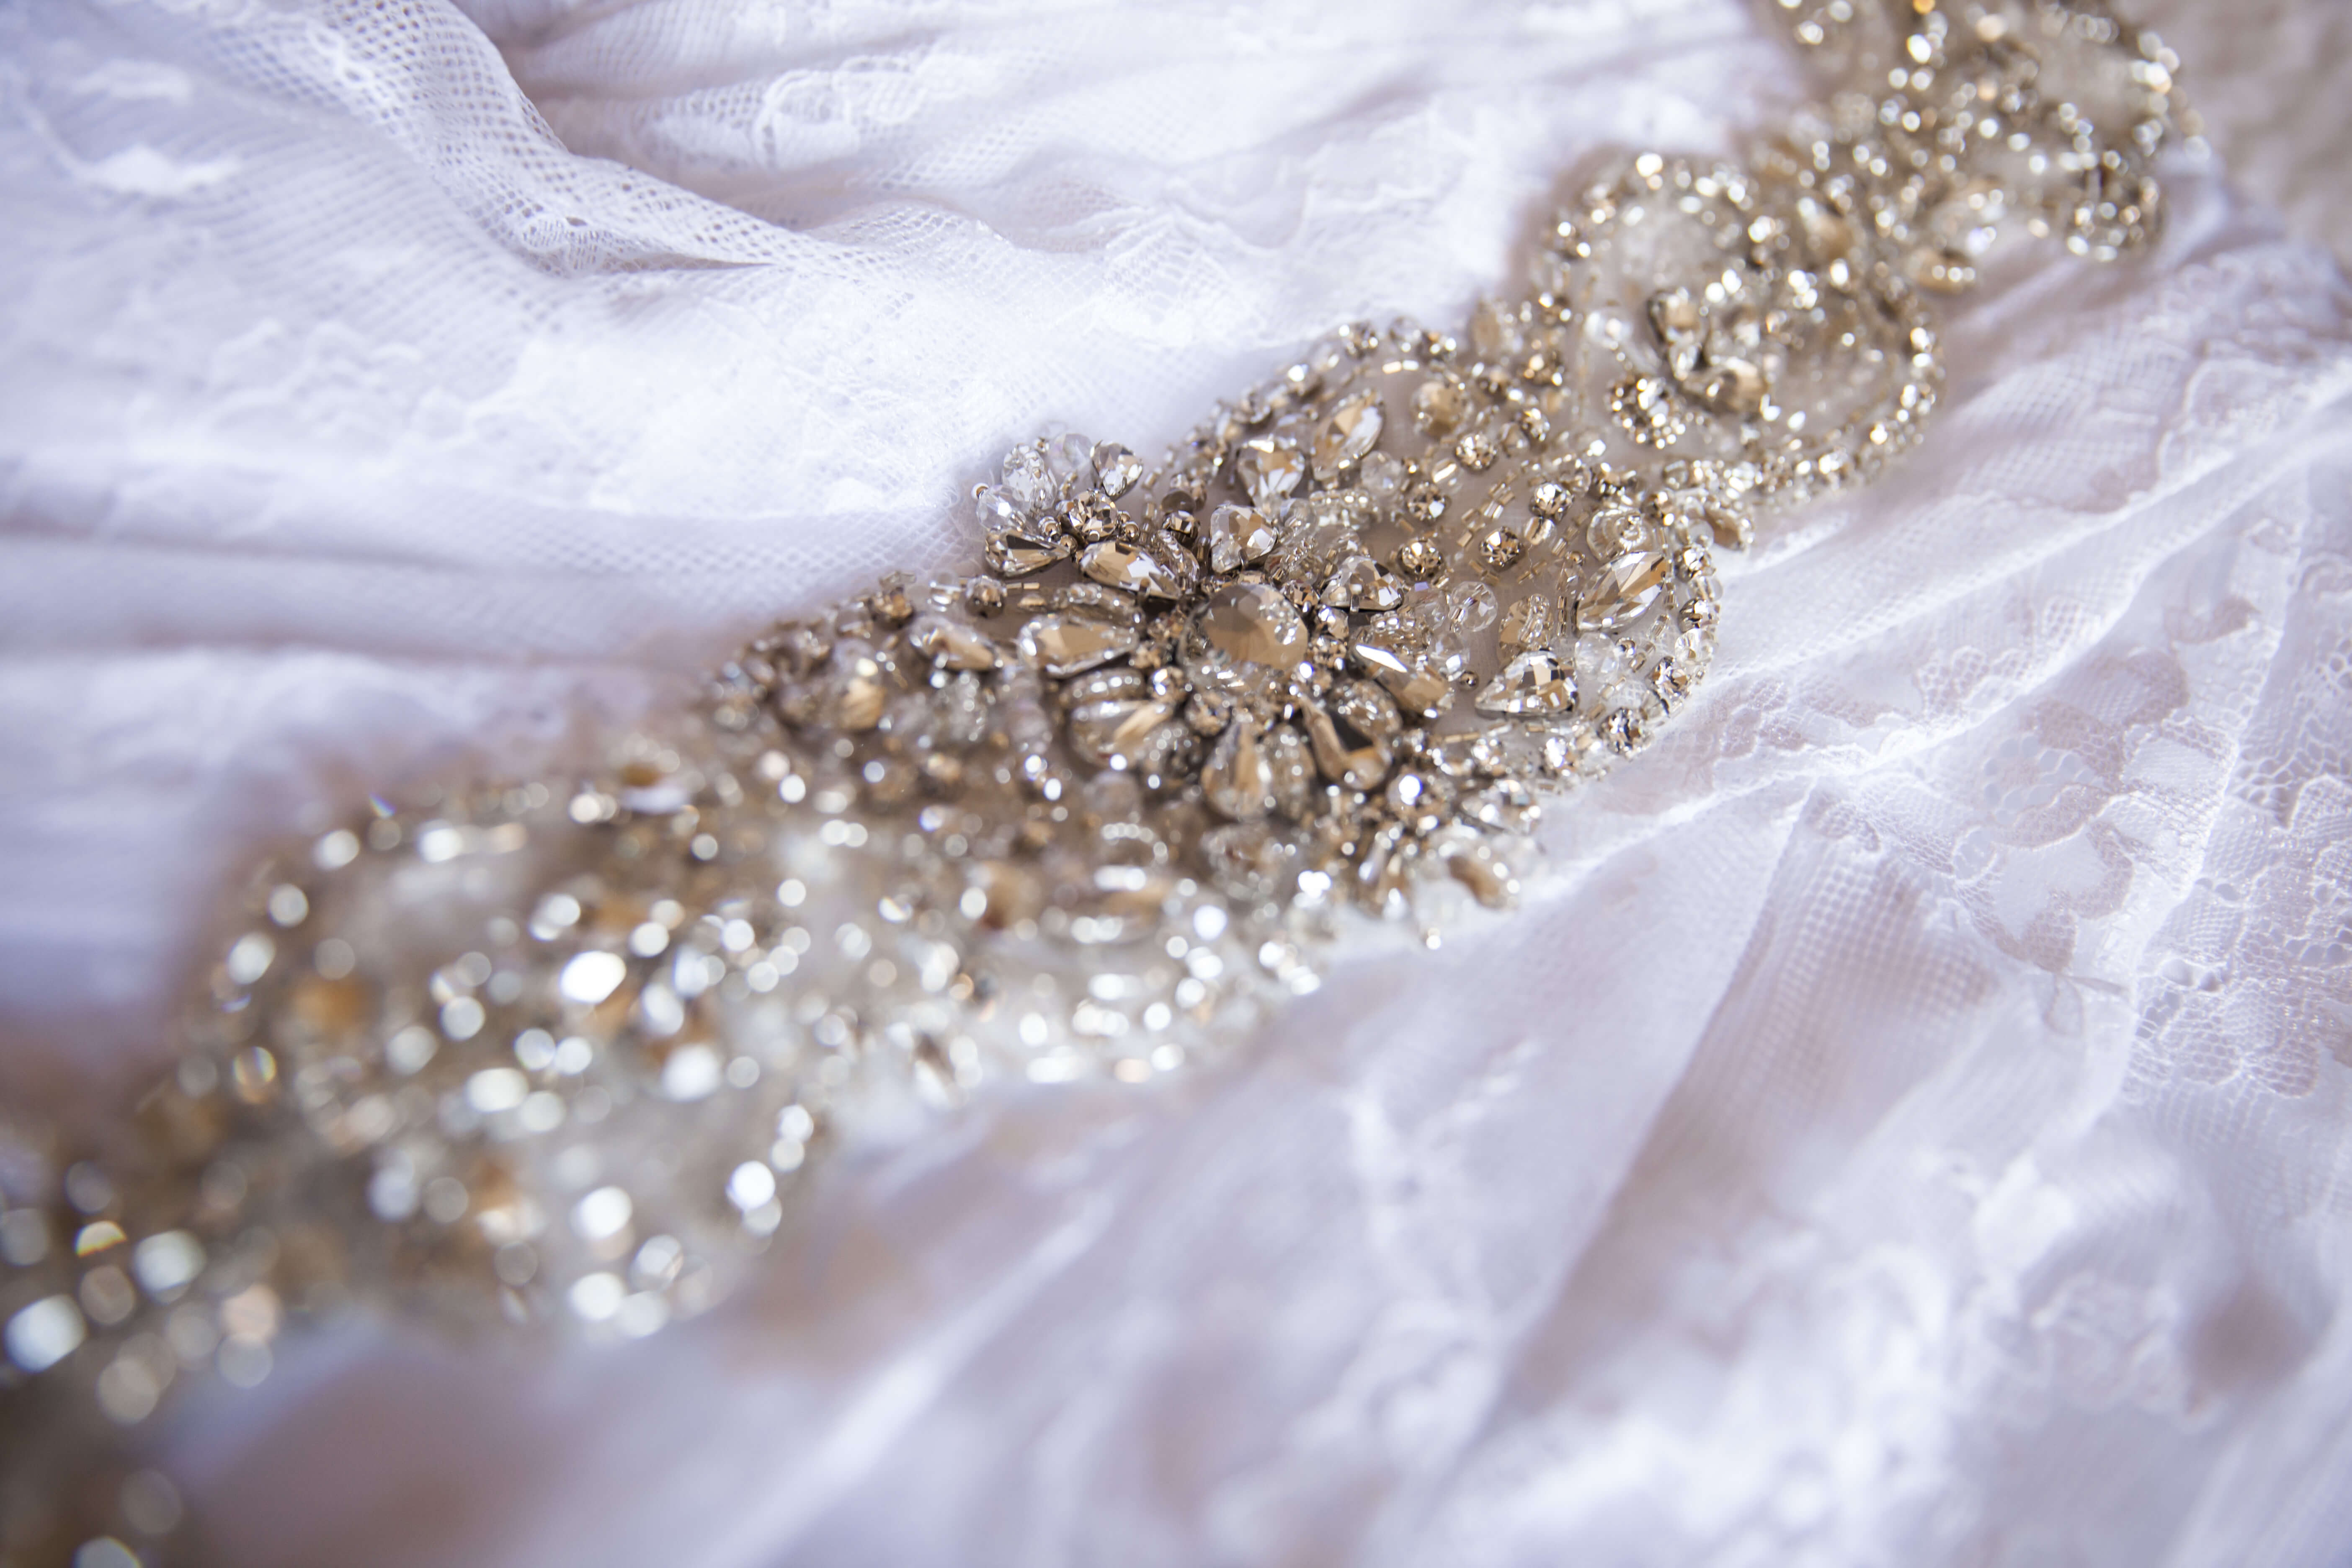 close up of the details on the bride's wedding dress